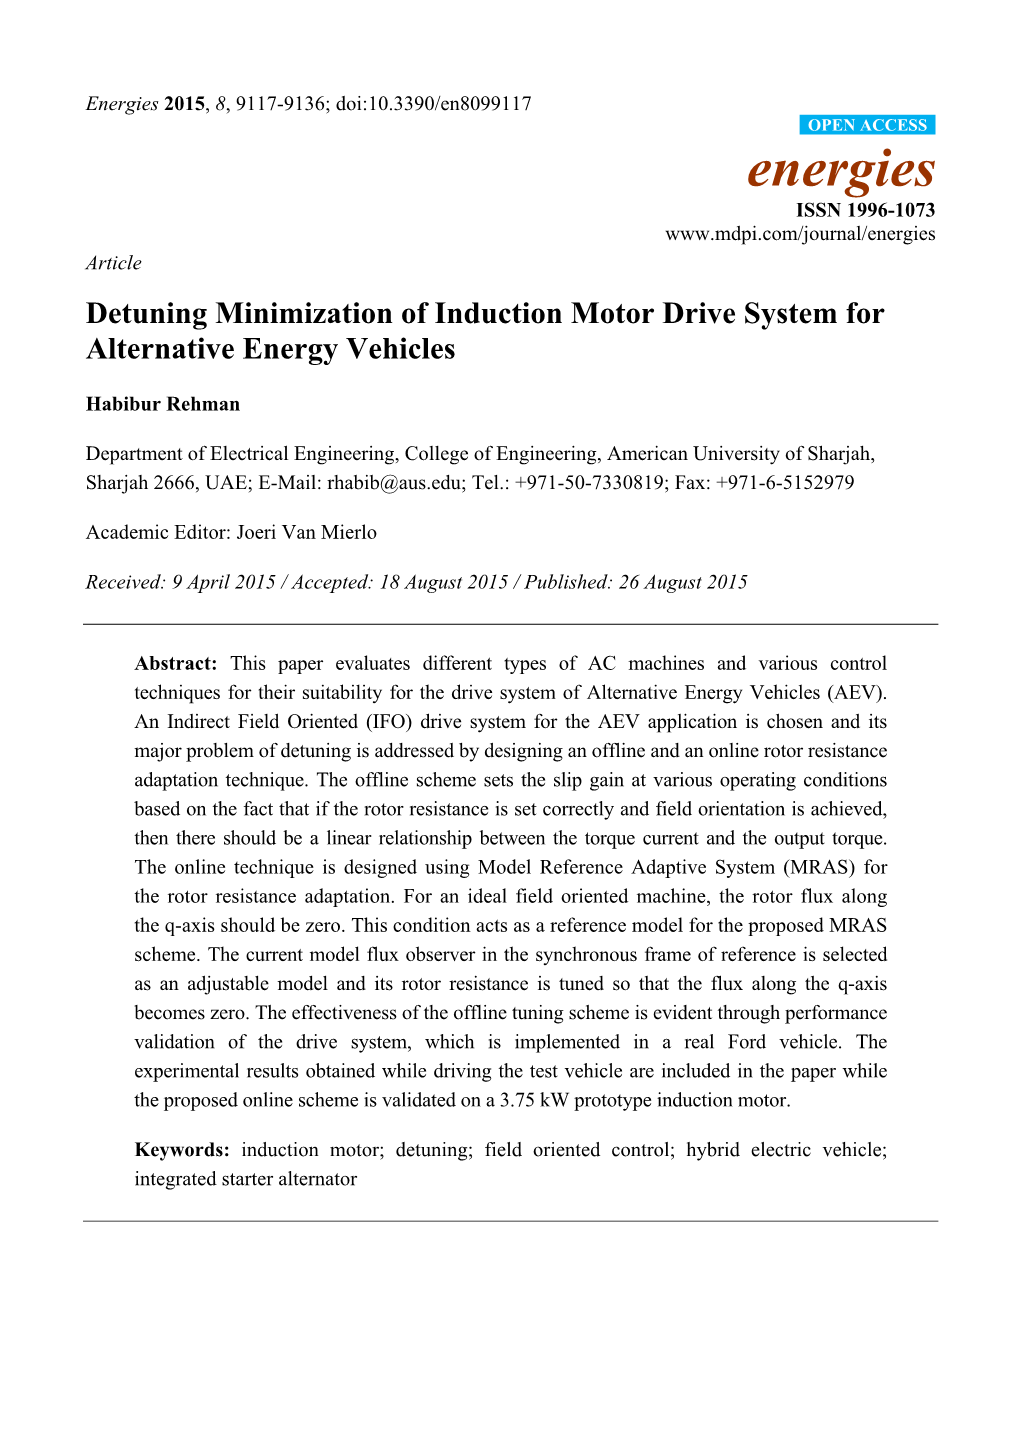 Detuning Minimization of Induction Motor Drive System for Alternative Energy Vehicles